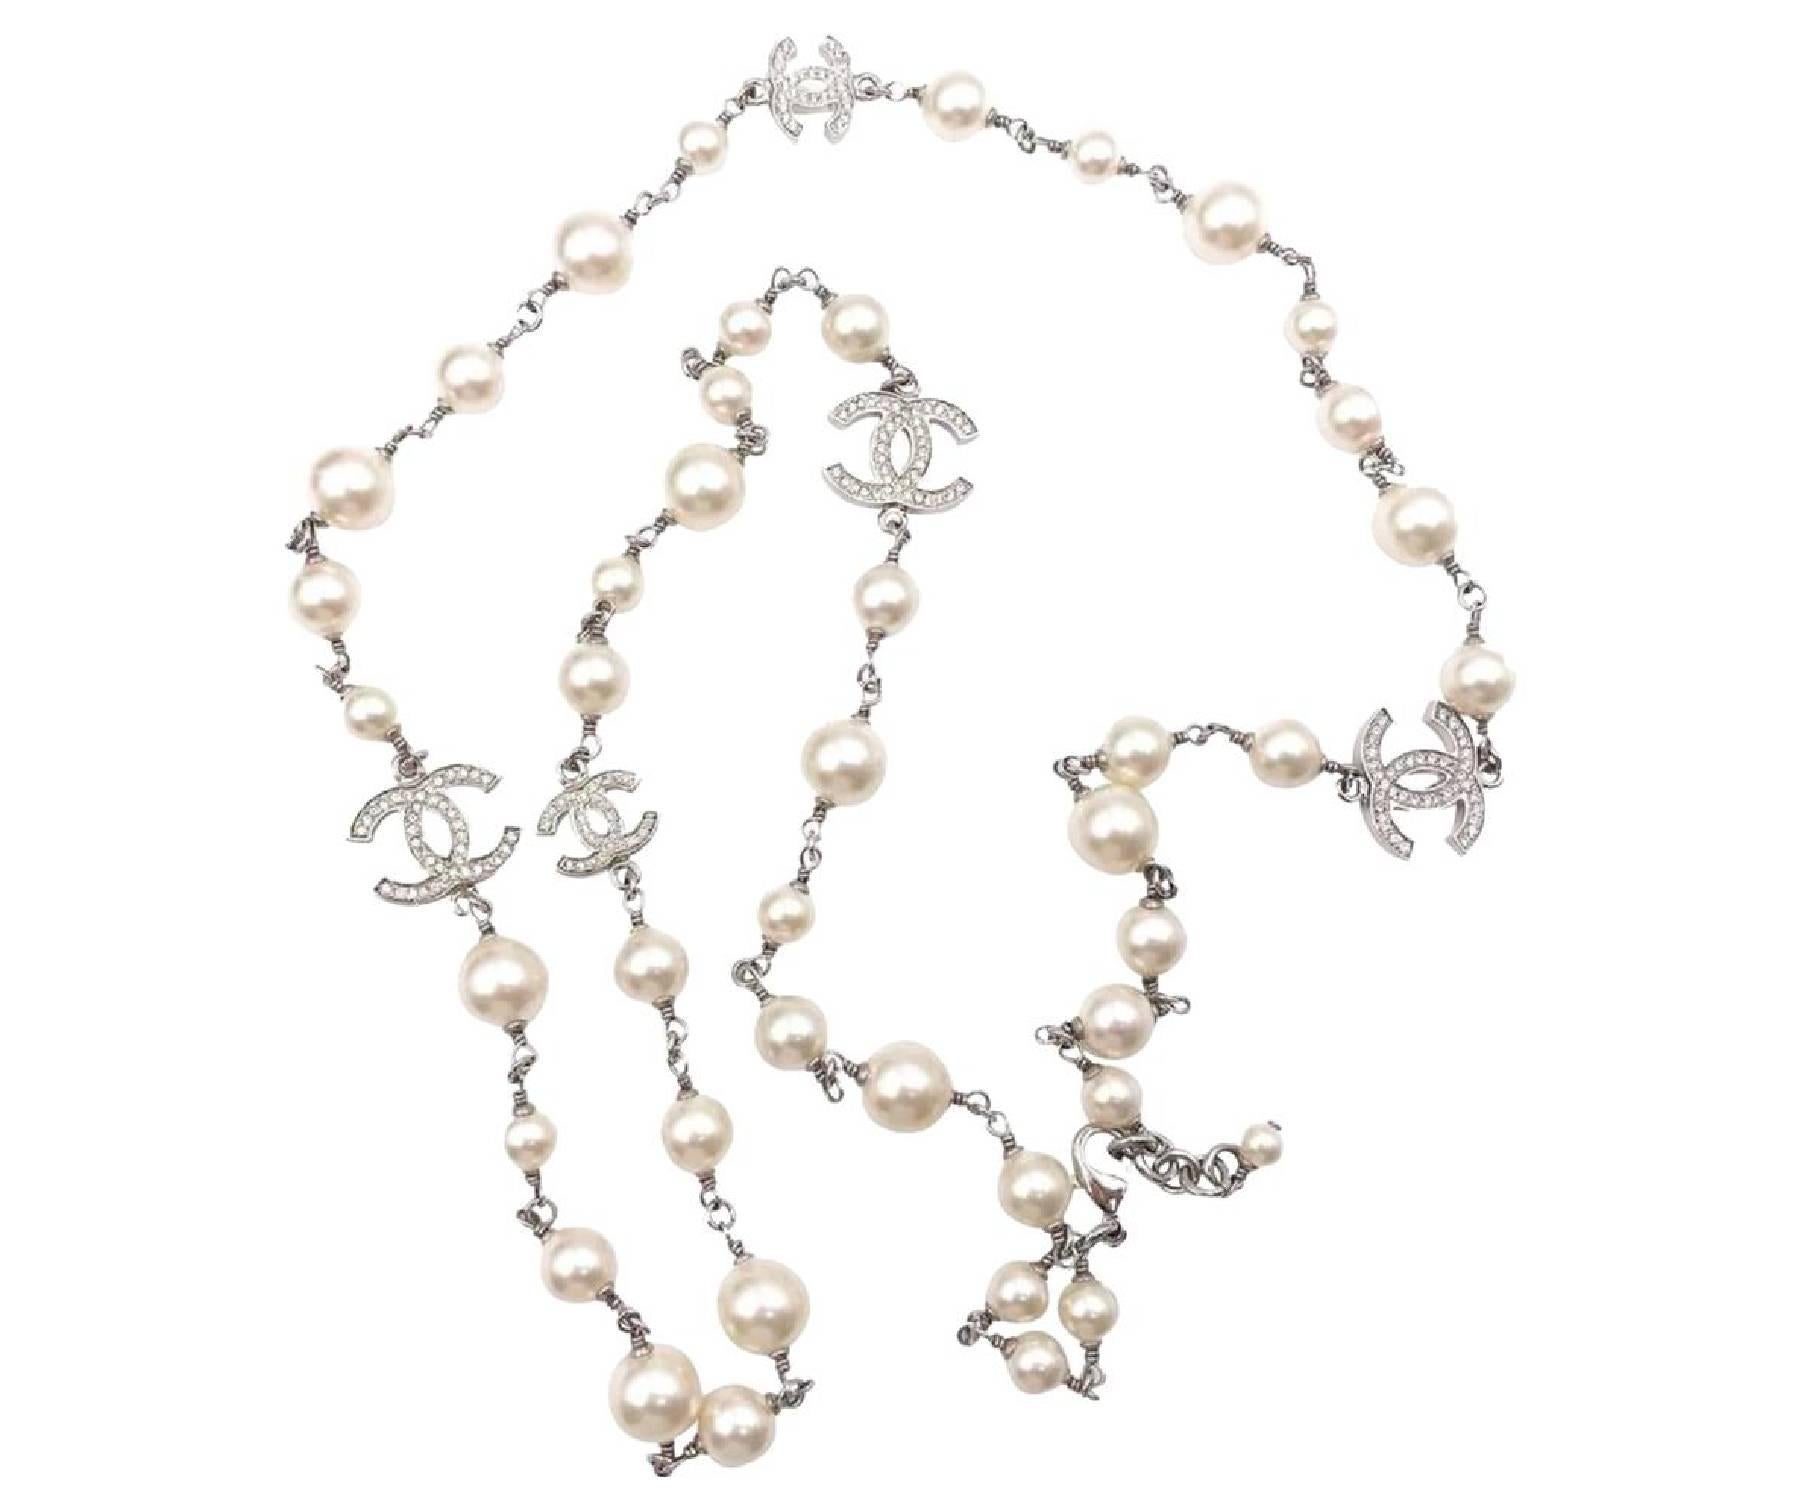 Chanel 5 Silver CC Crystal Faux Pearl Long Necklace

* Marked 12
* Made in France

-It is approximately 42